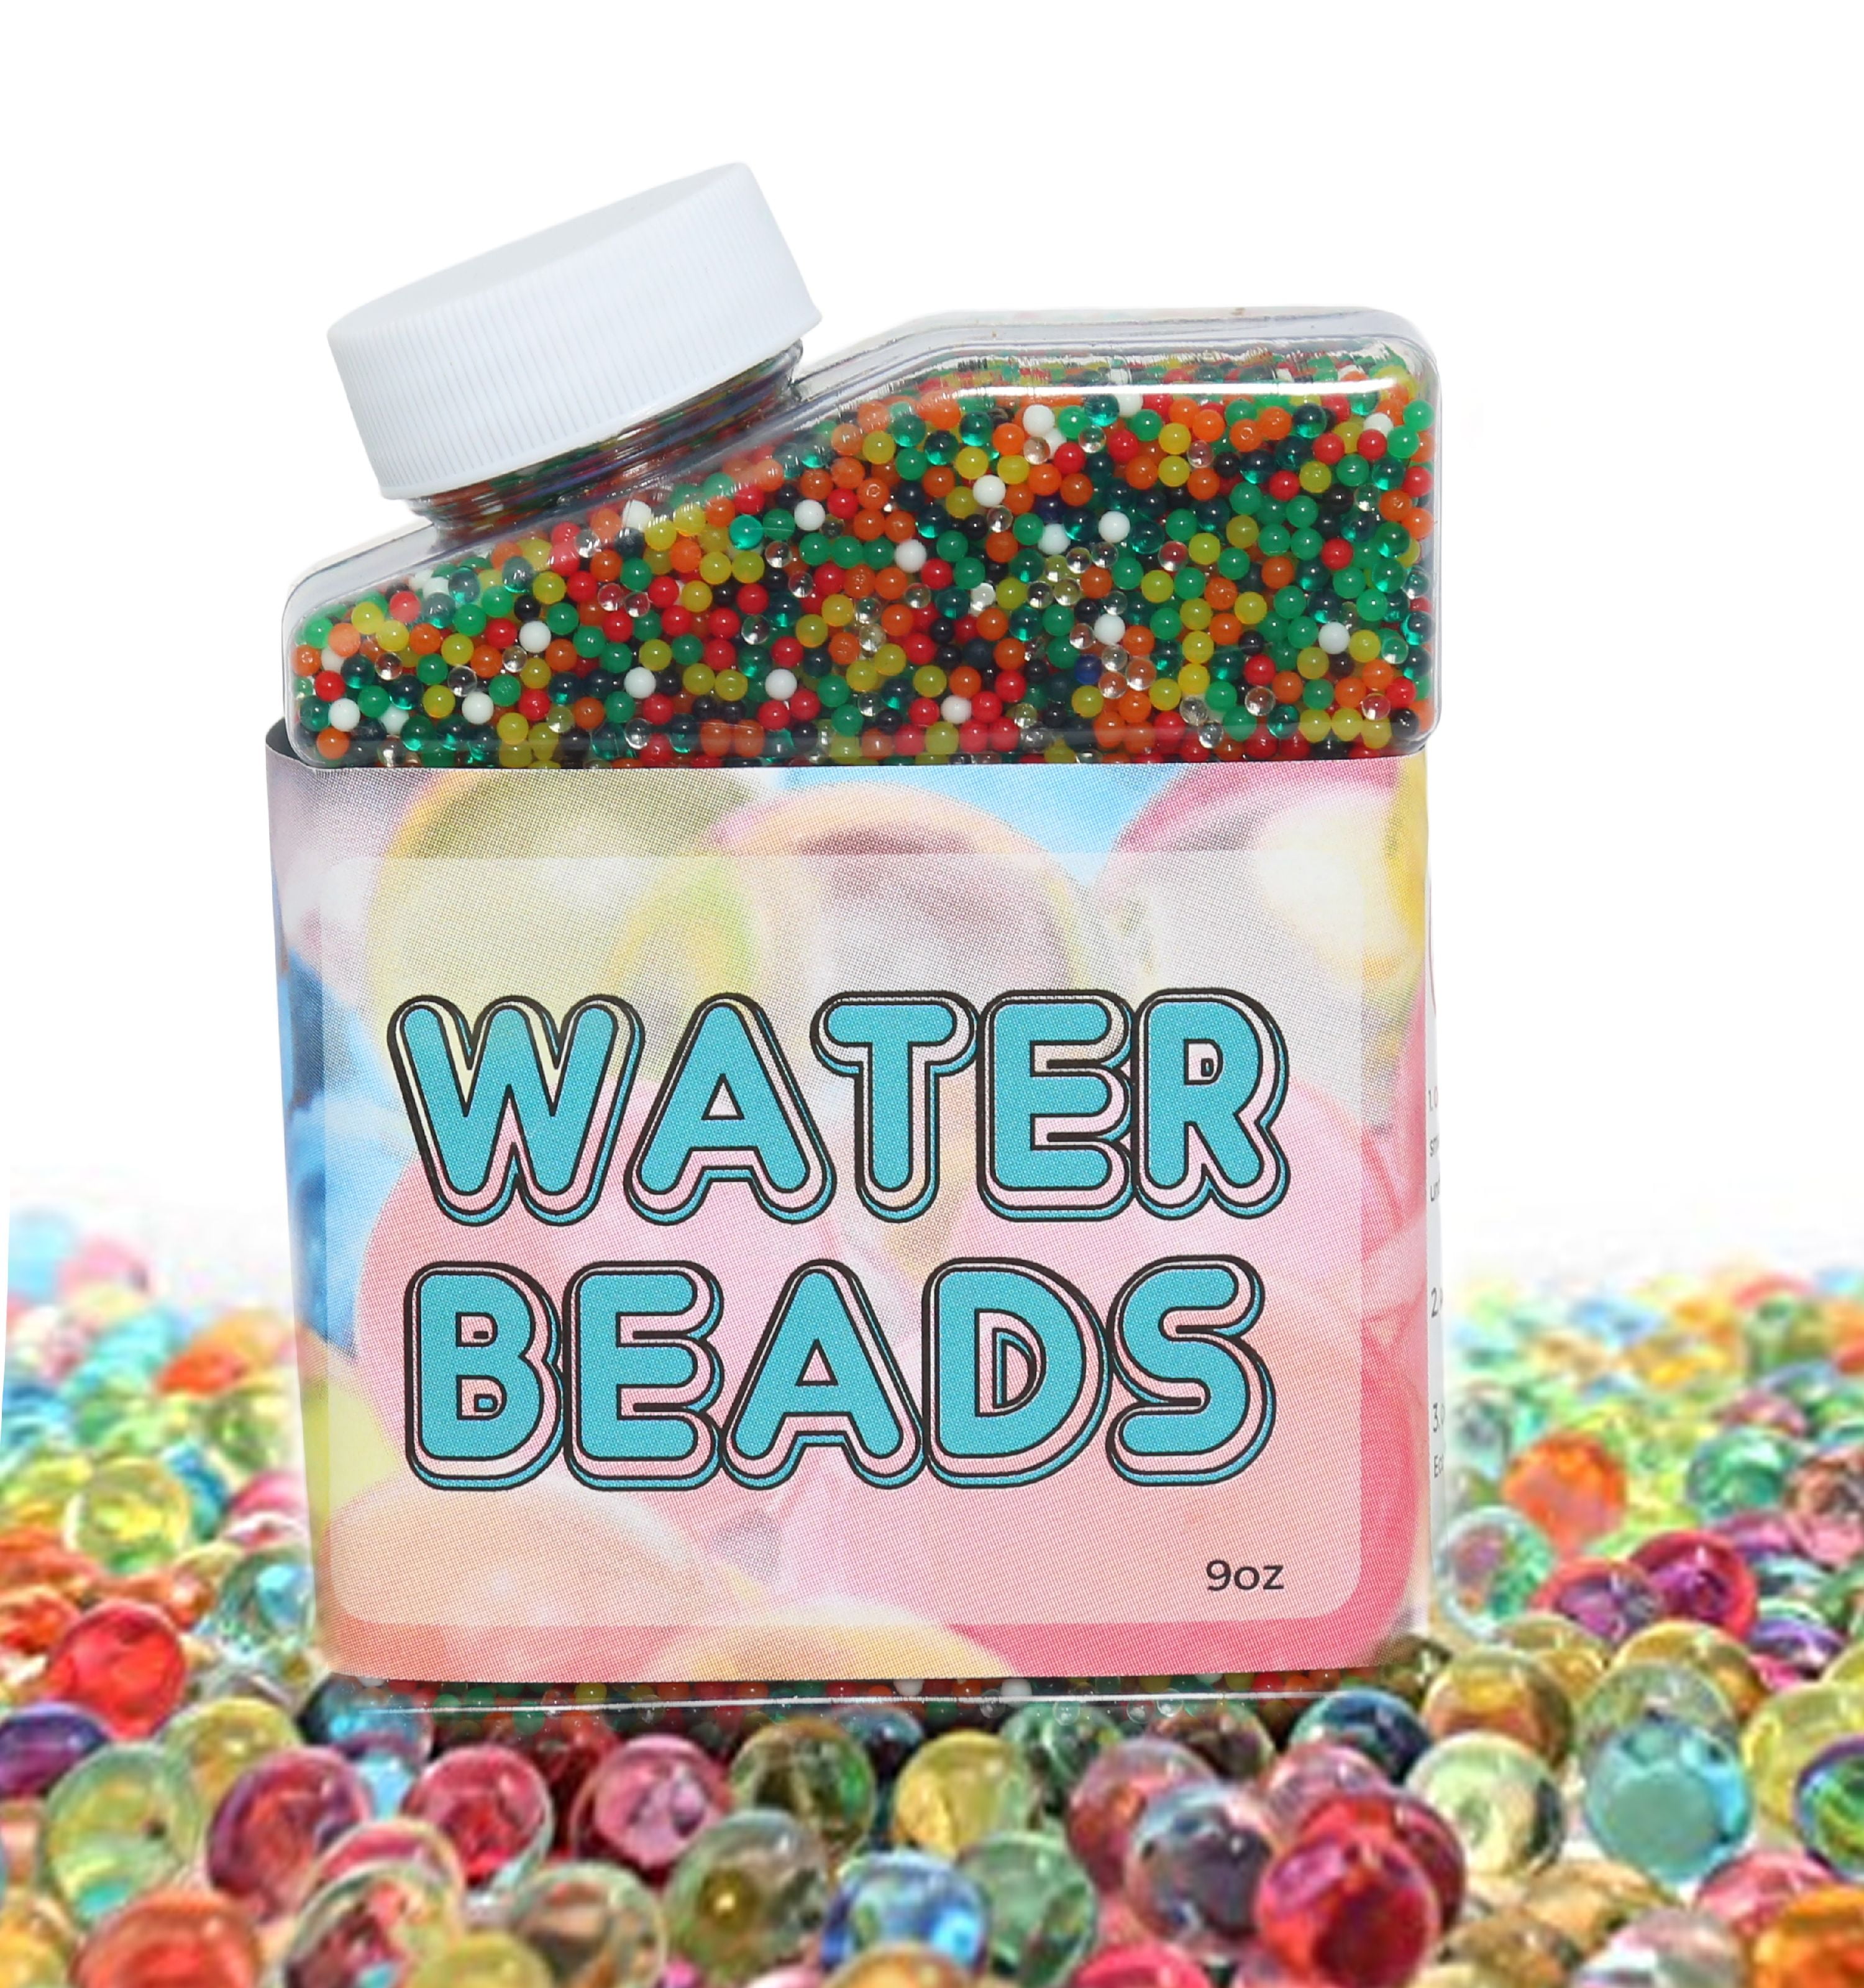 LEEHUR Soft Water Beads for Kids Non-Toxic Sensory Play Toys Rainbow Mix Gel Jelly Growing Balls Spa Refill Vases Home Outdoor Party Decoration 9 Ounces 